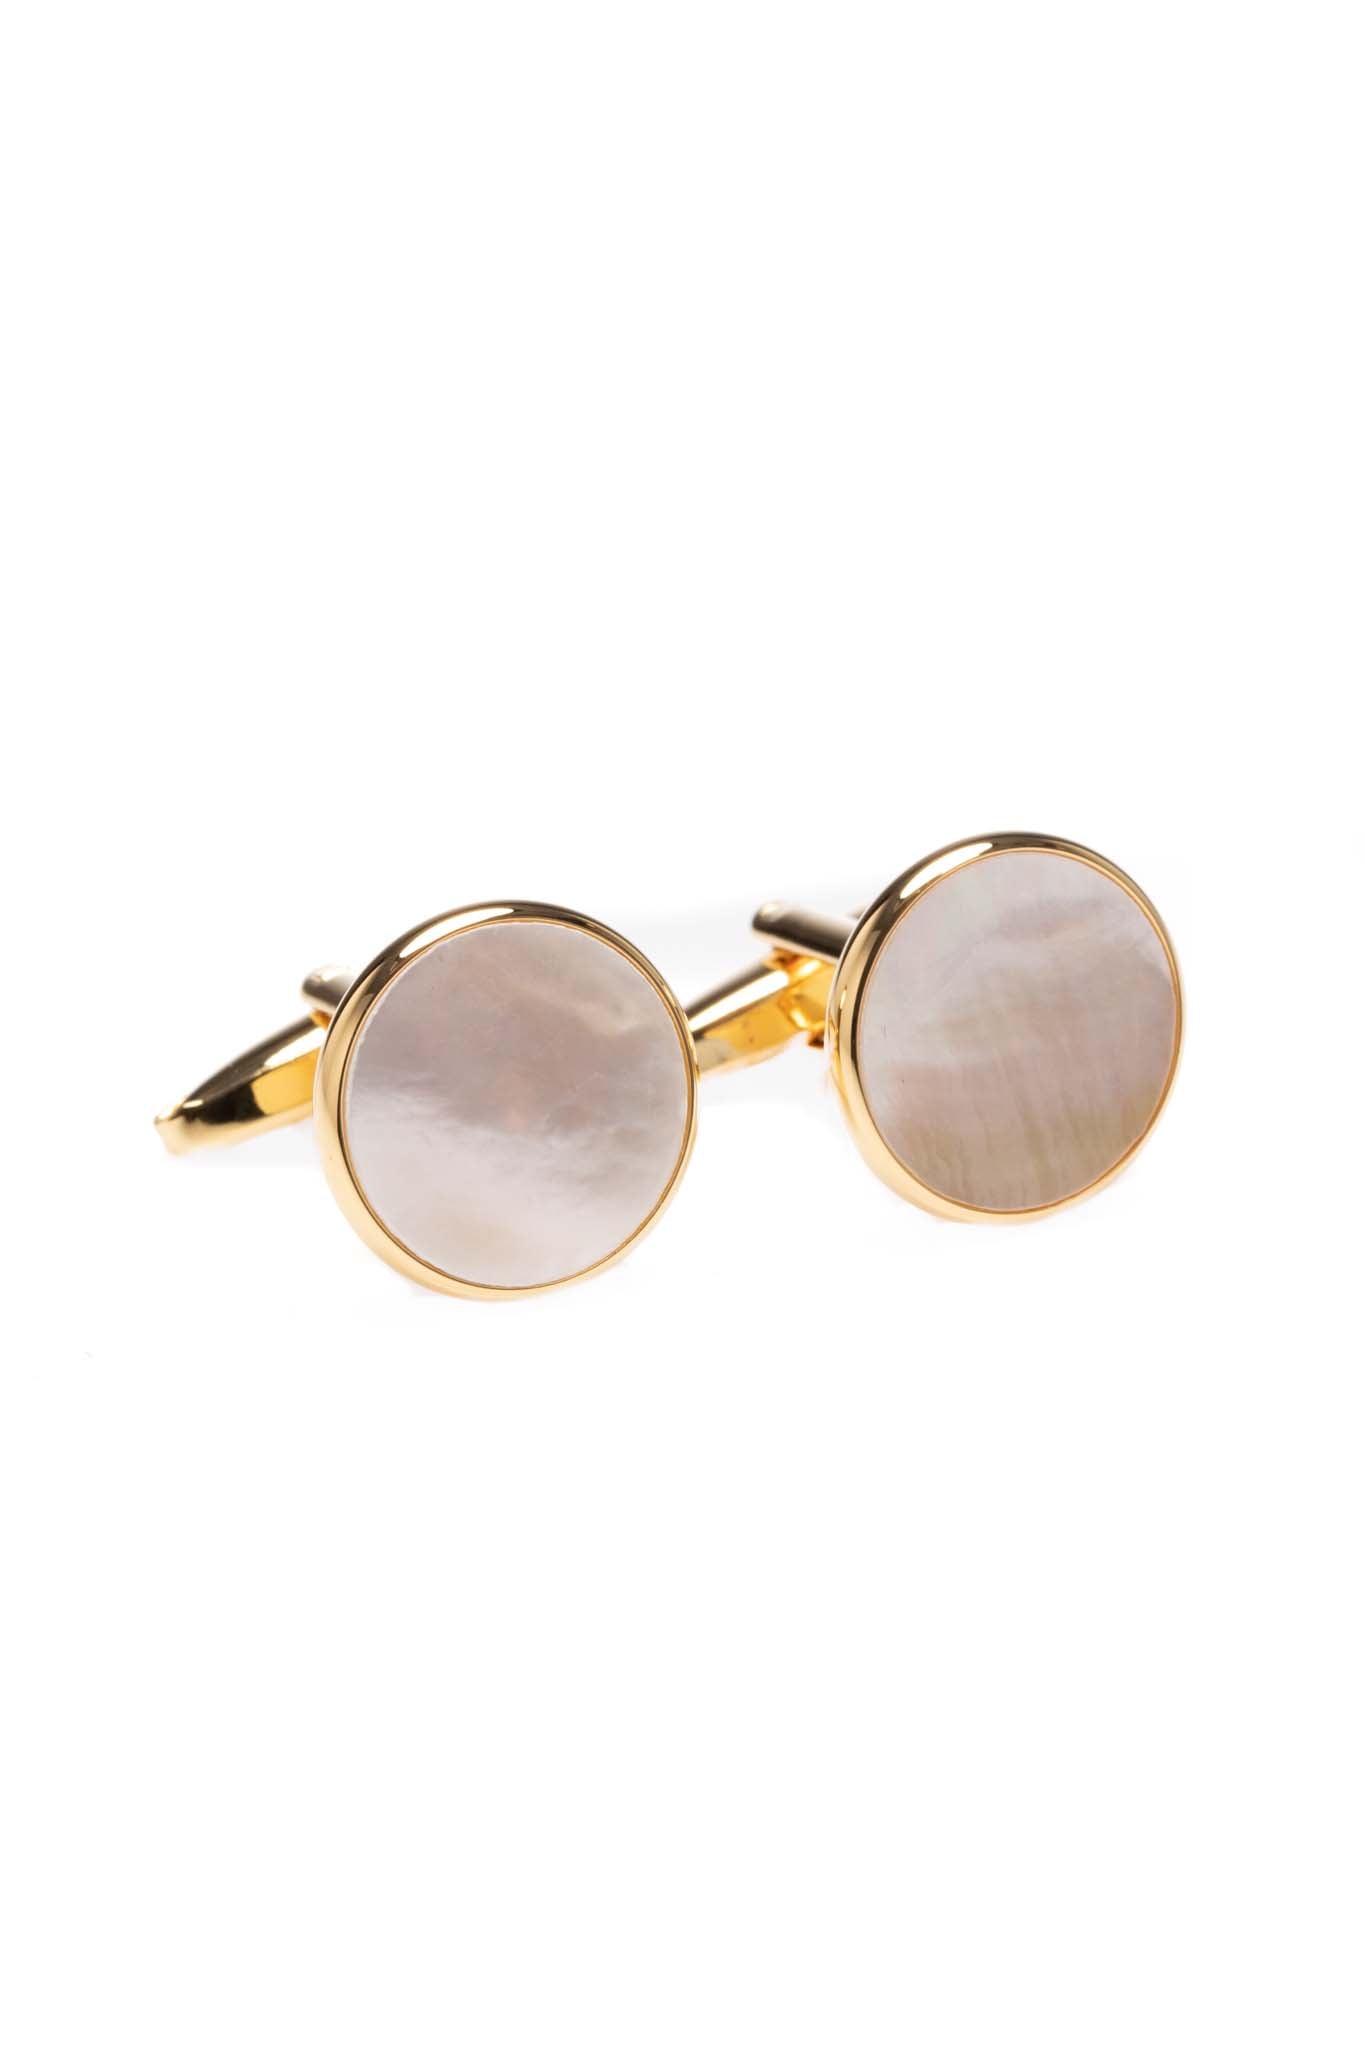 Set of golden cufflinks and buttons with white stone